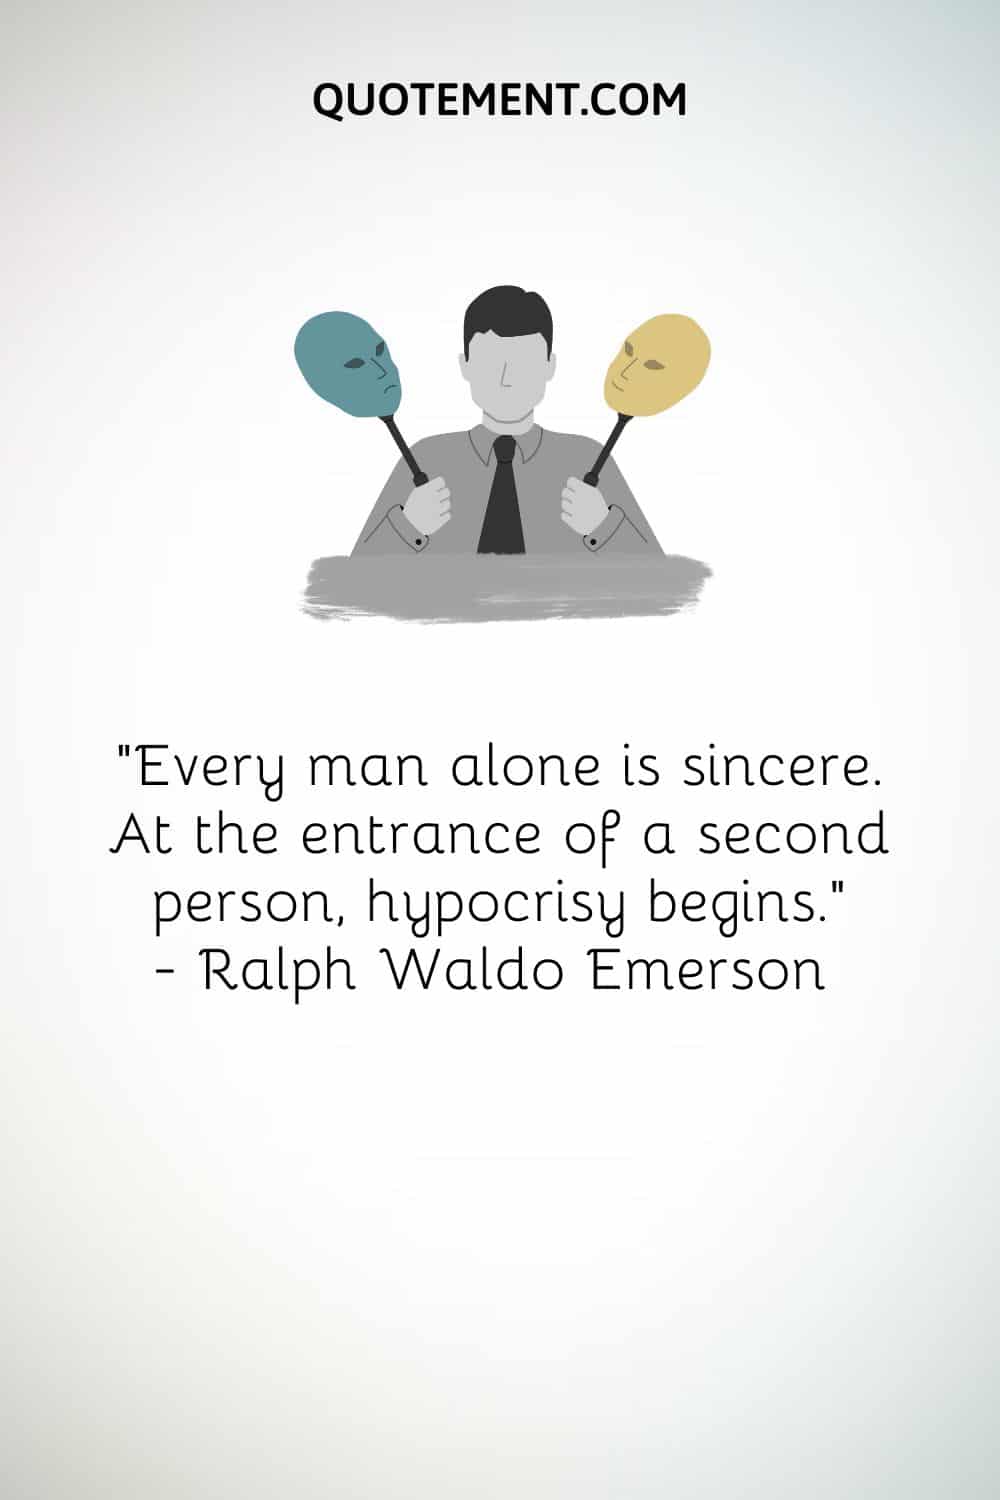 “Every man alone is sincere. At the entrance of a second person, hypocrisy begins.” — Ralph Waldo Emerson